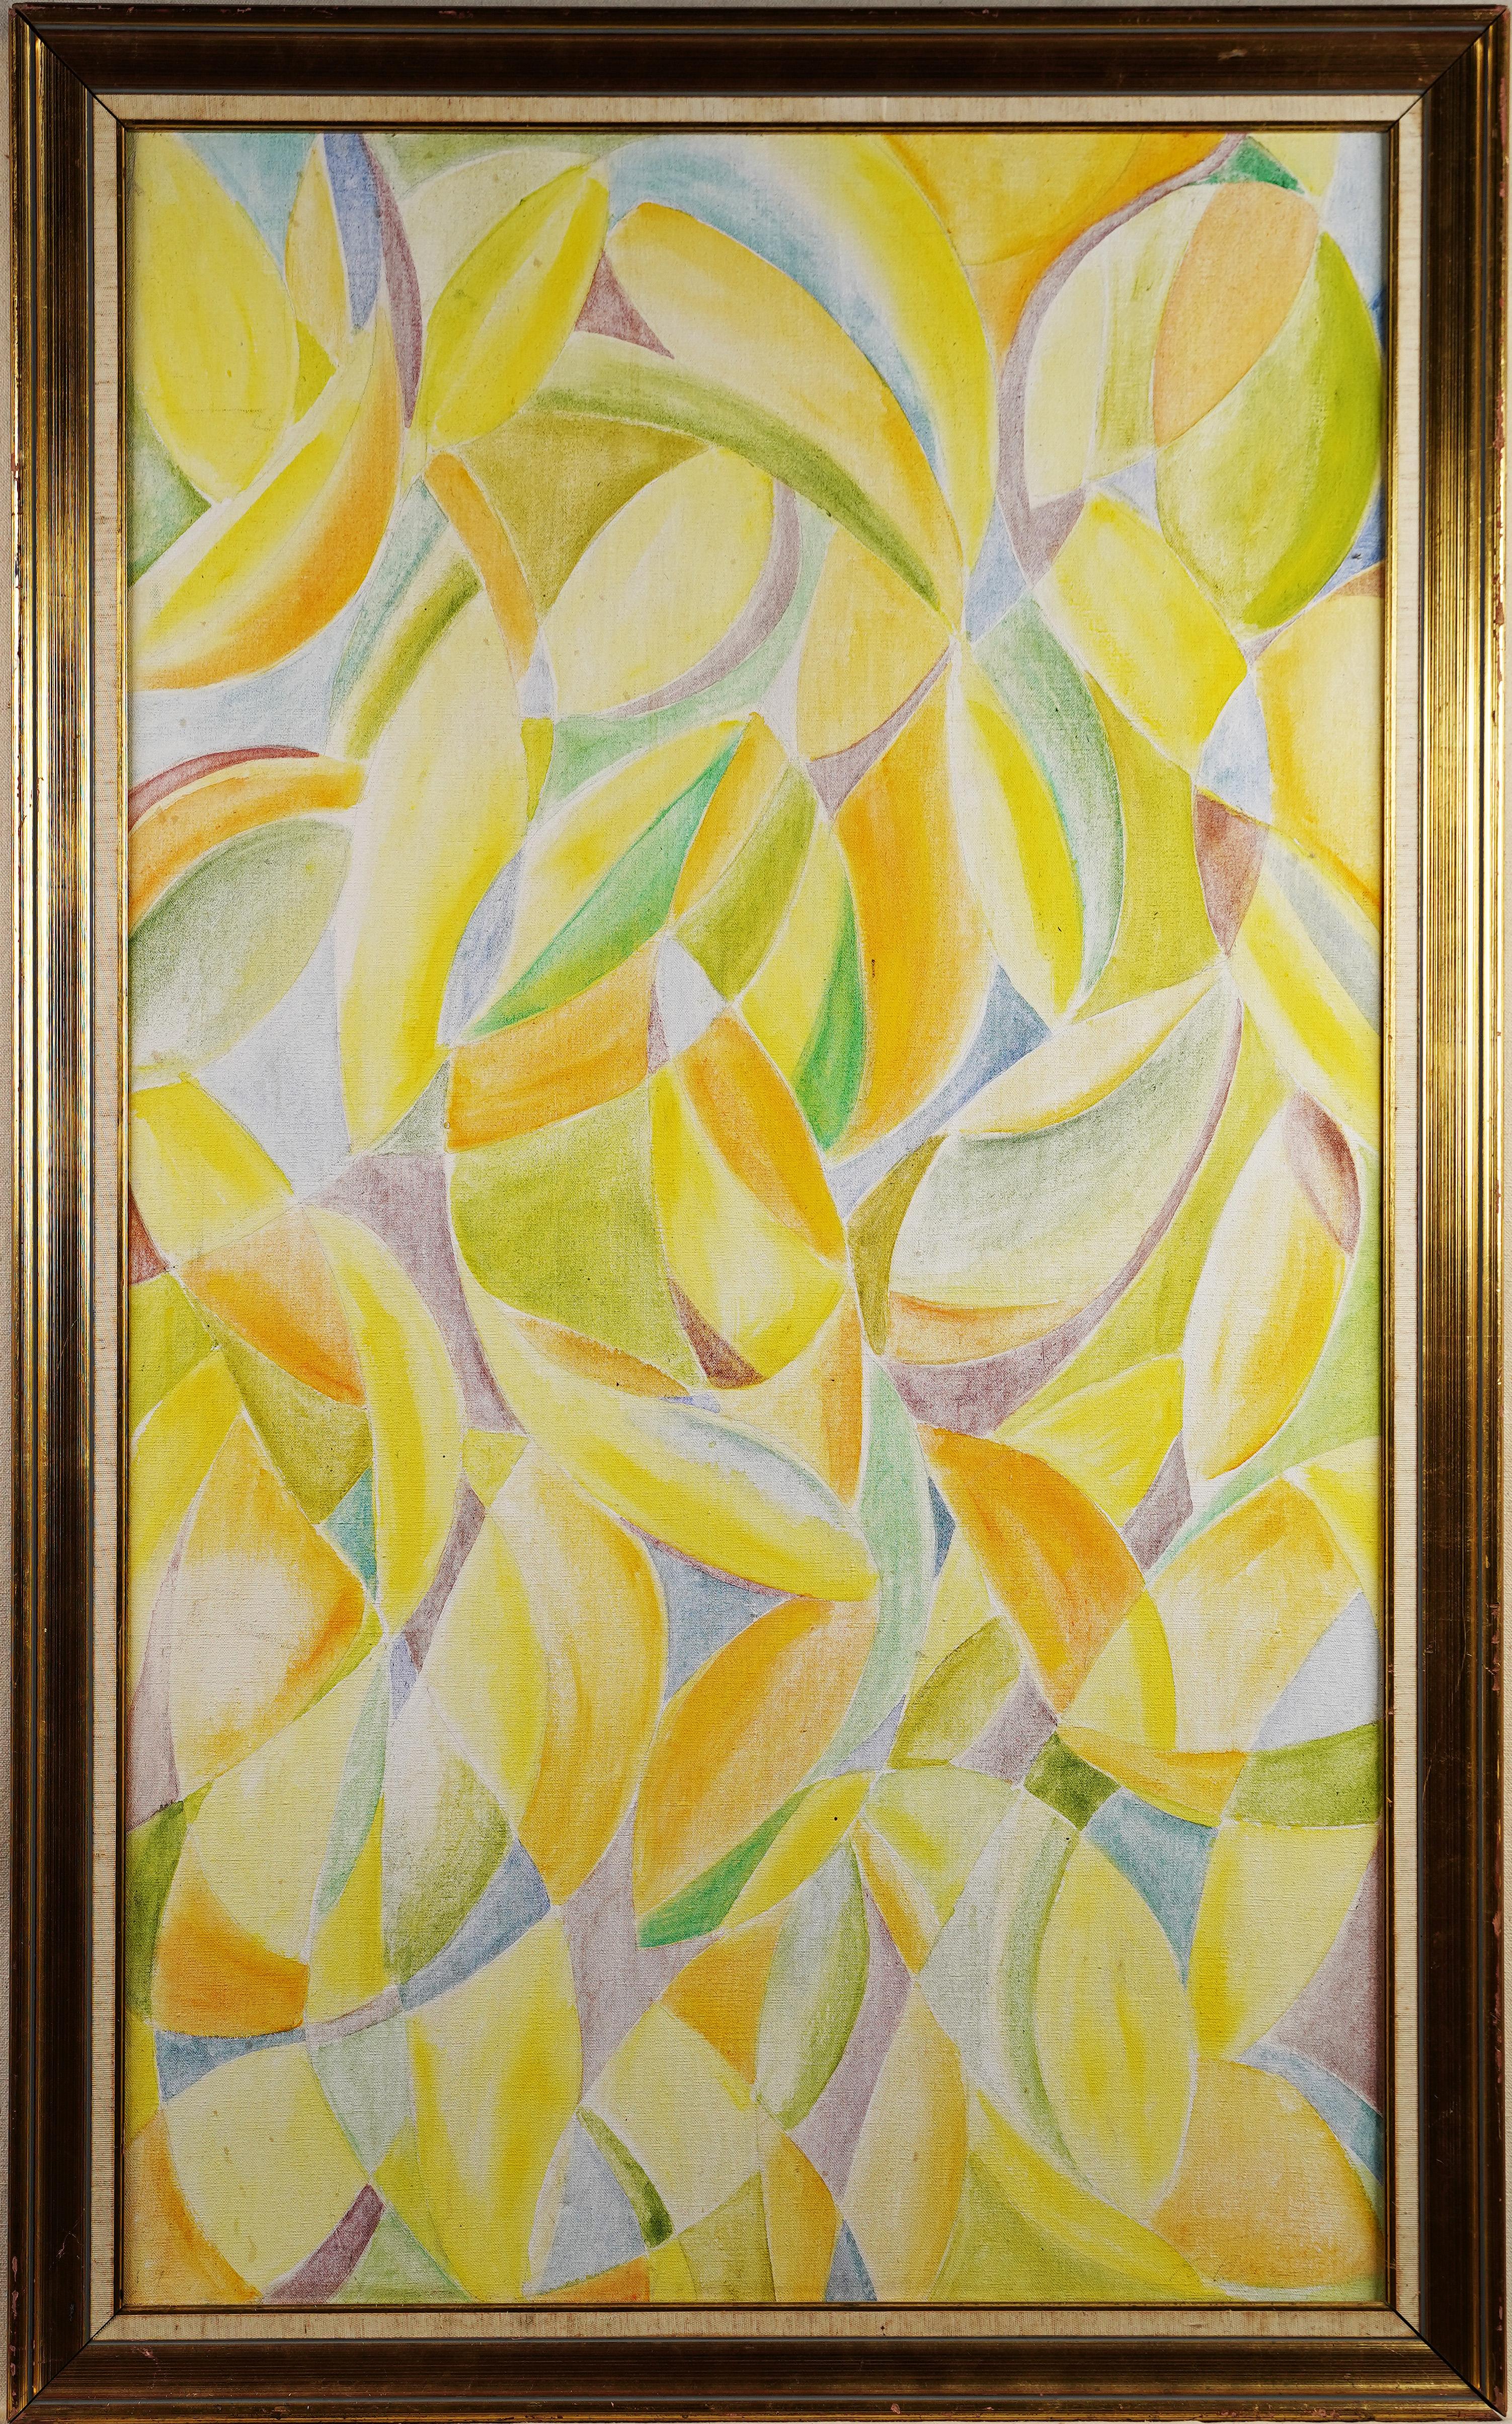 Unknown Abstract Painting - Vintage Signed American Large Framed Abstract Oil Painting